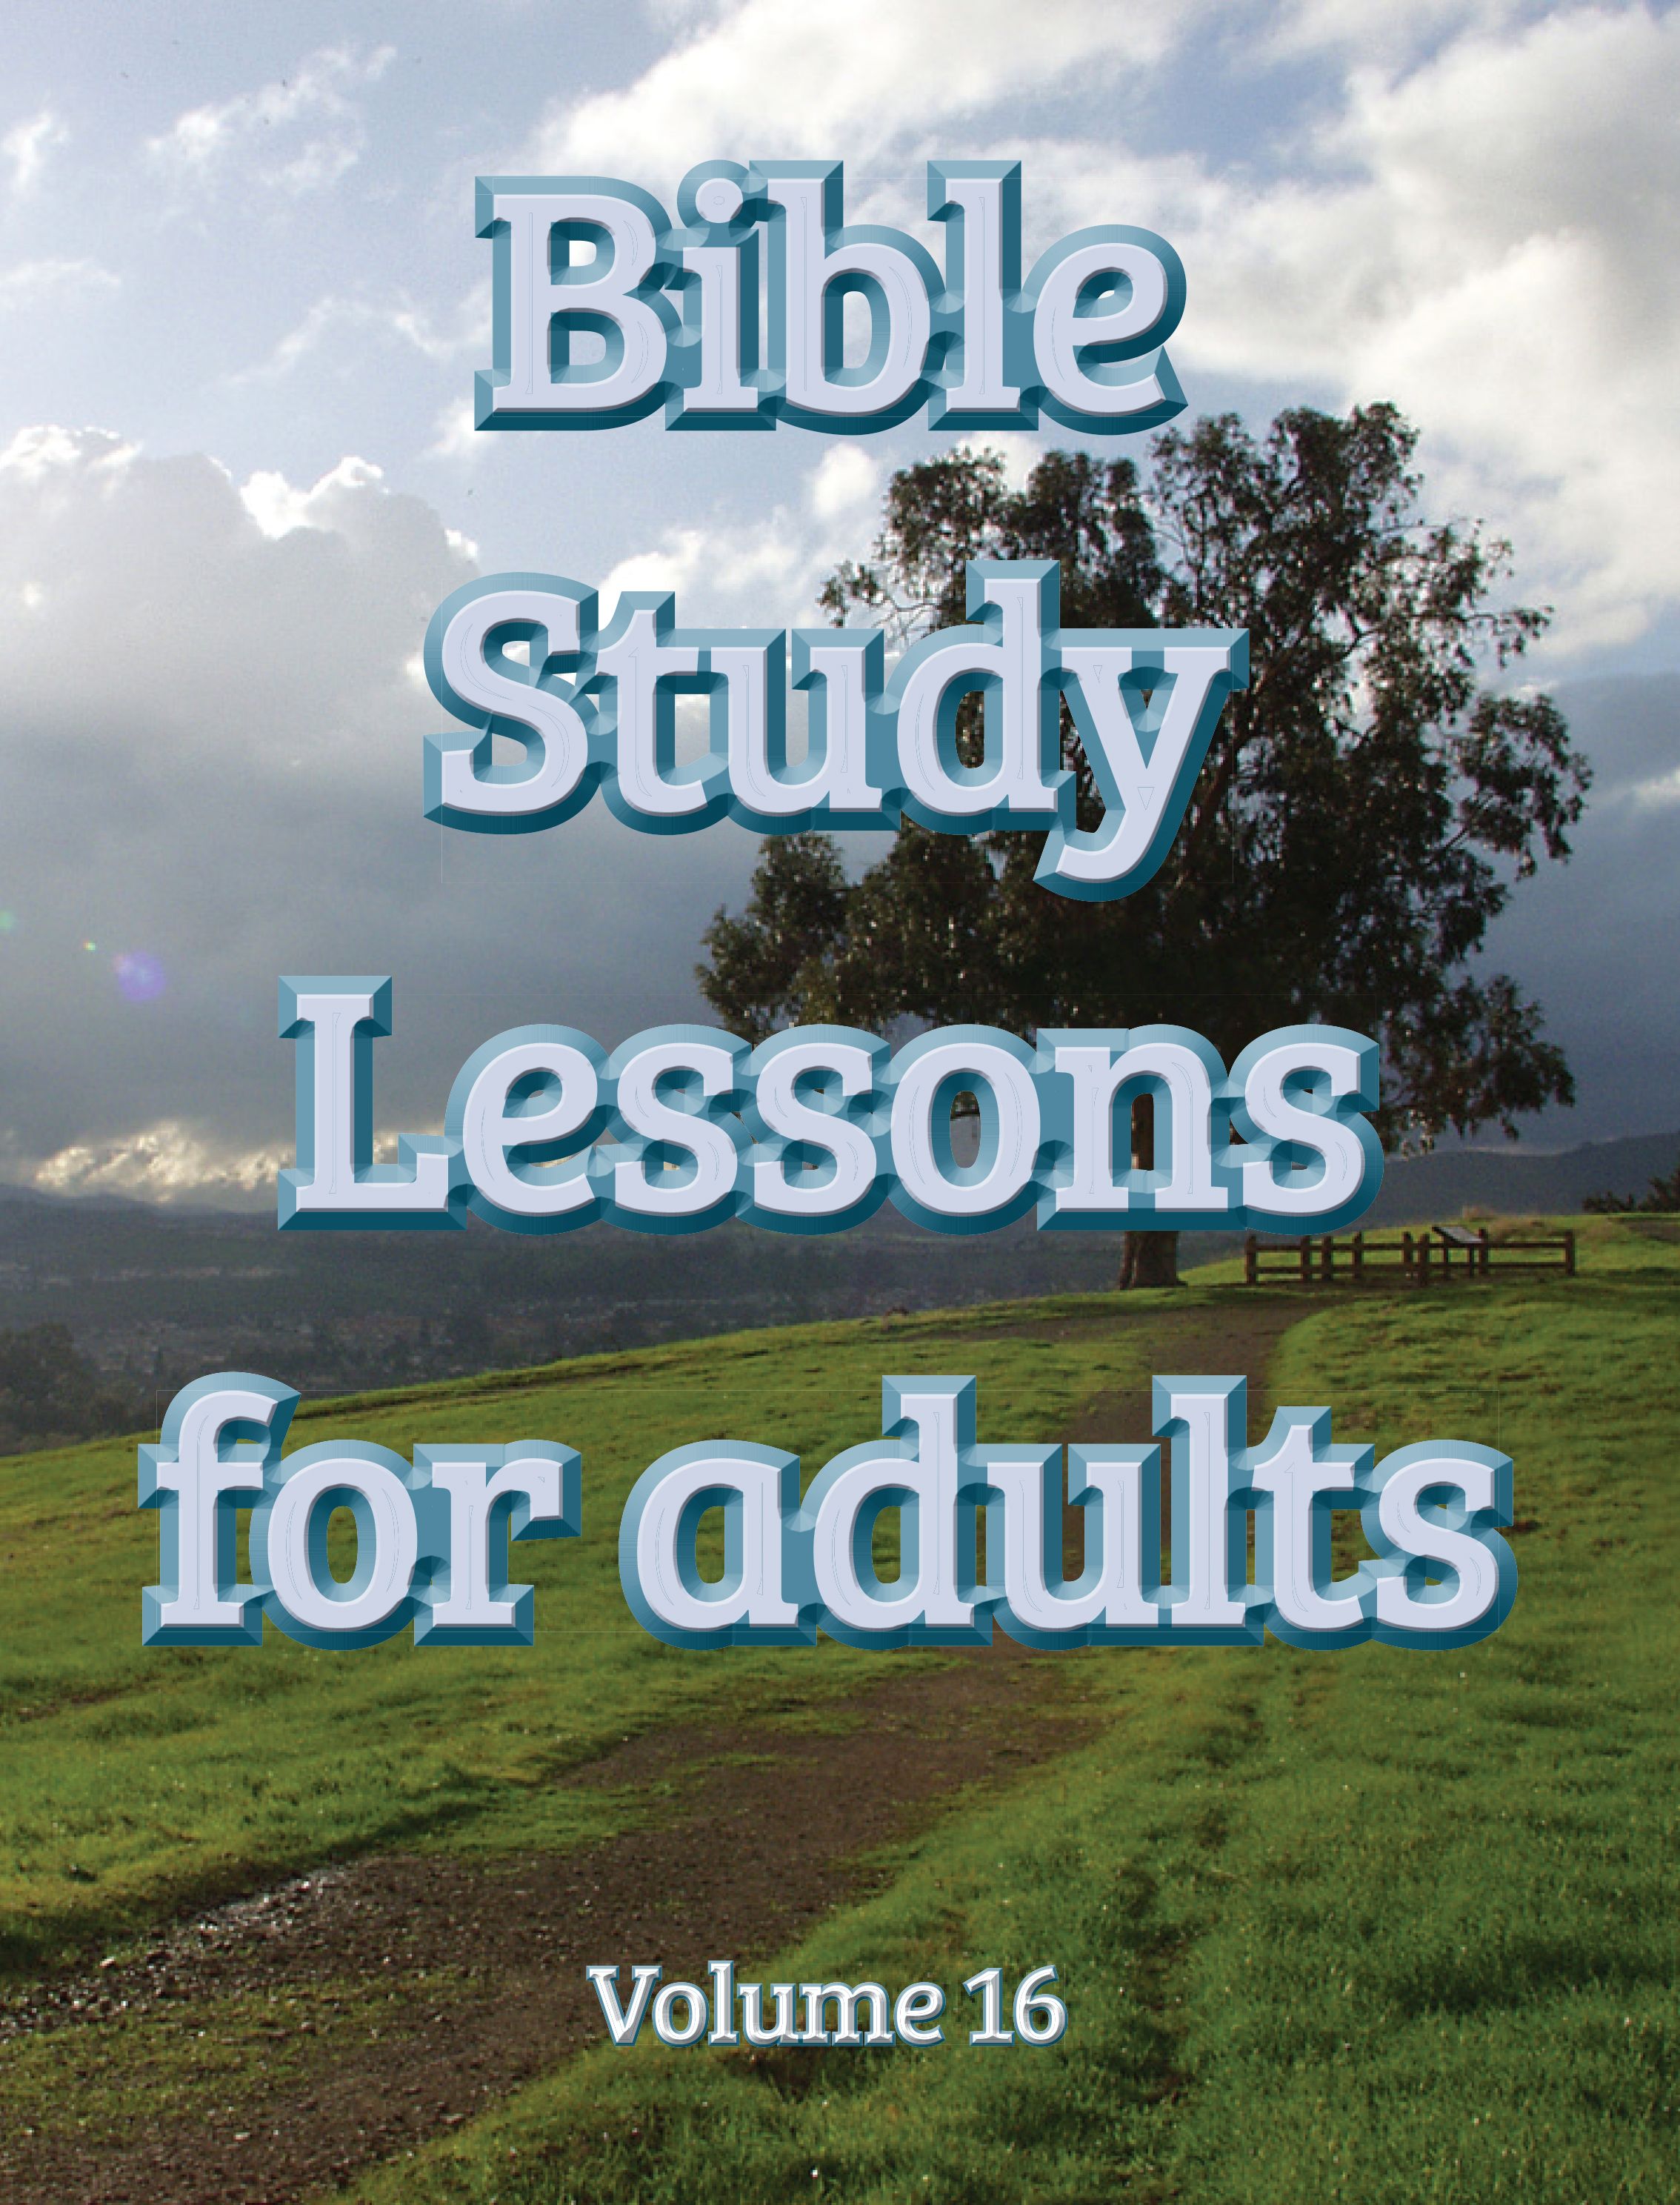 Bass reccomend Adult bible study lesson